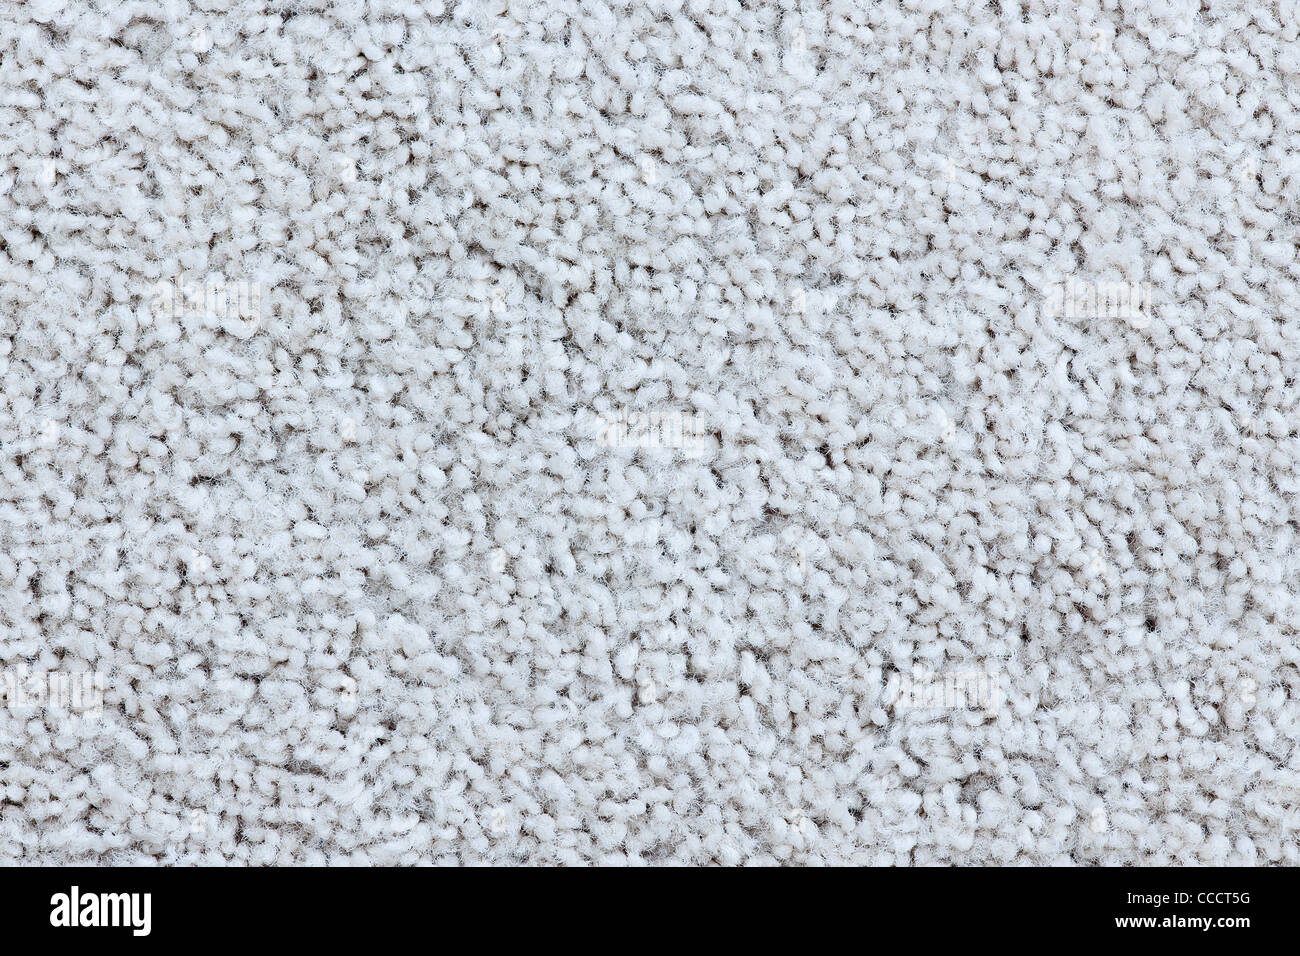 White carpet up close creating a beautiful textured background image. Stock Photo